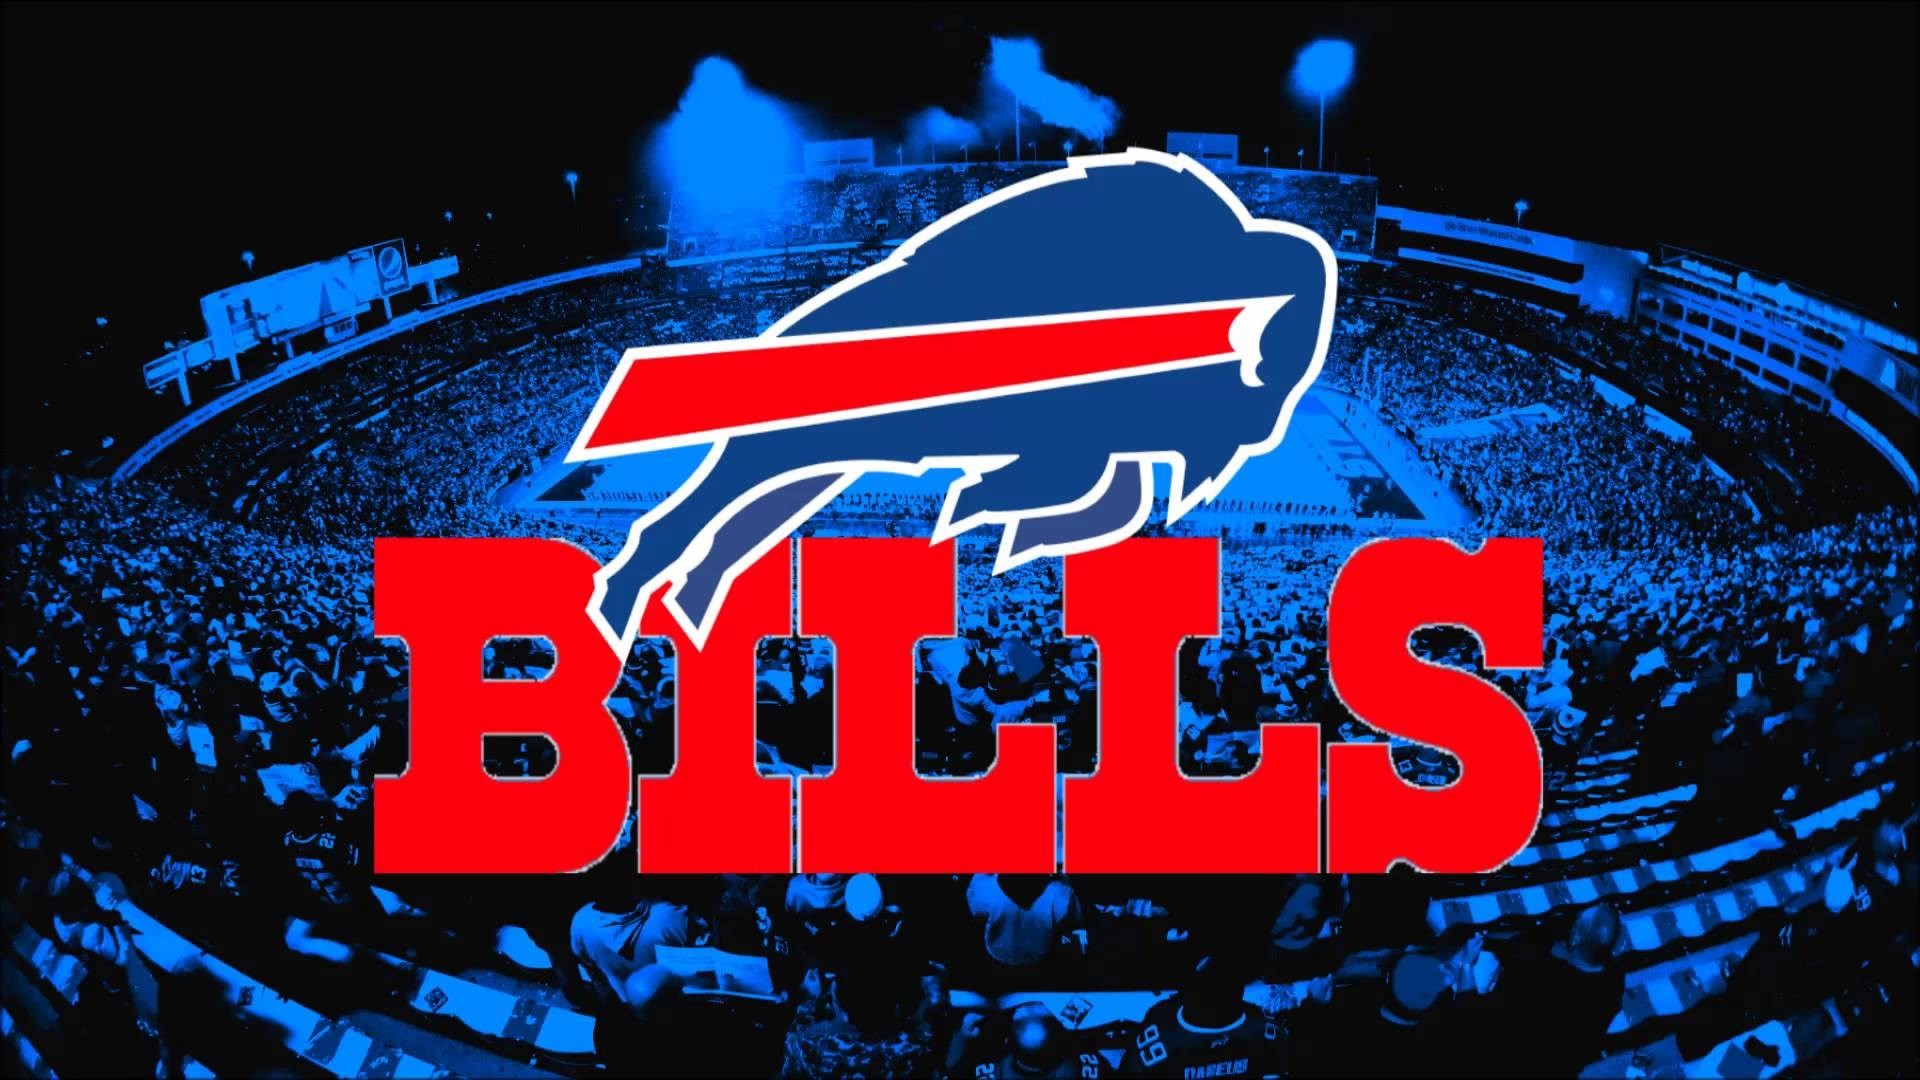 1920x1080 free desktop pictures buffalo bills by Lester Walls (2016-08-14)